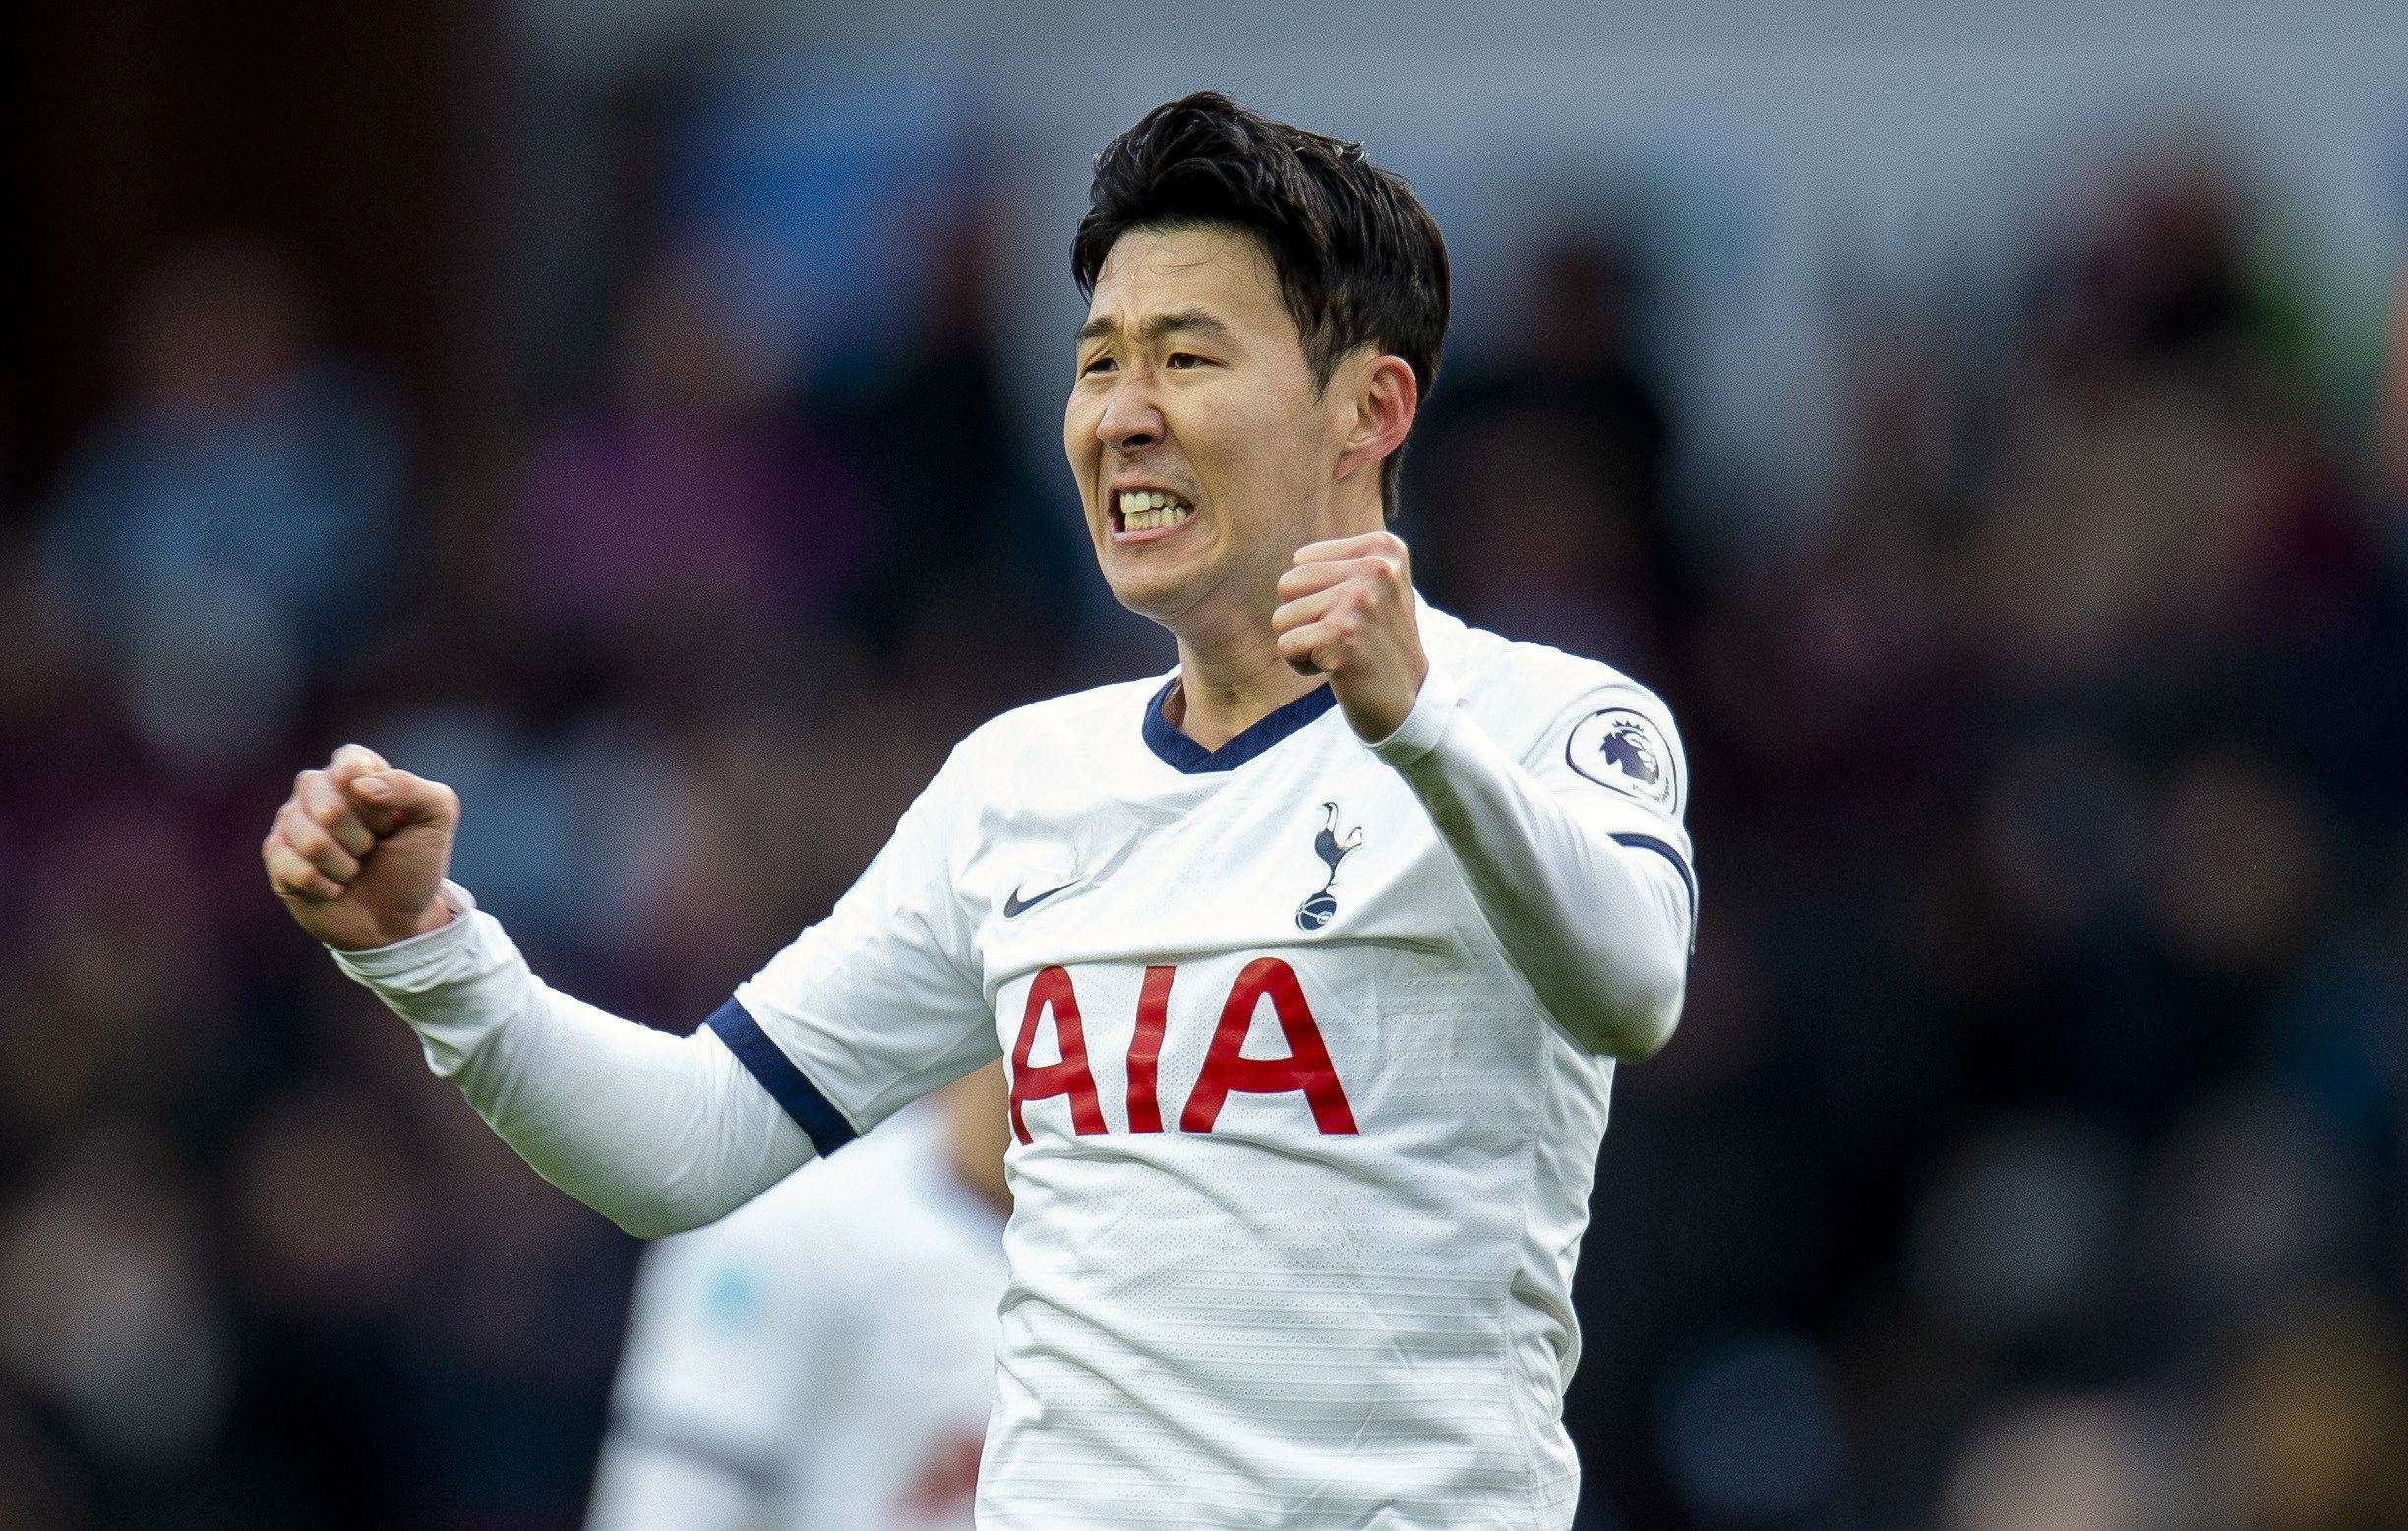 El jugador coreano del Tottenham Hotspurs Son Heung-Min regresó a su pais con el permiso de su club EFE/EPA/PETER POWELL EDITORIAL USE ONLY. No use with unauthorized audio, video, data, fixture lists, club/league logos or 'live' services. Online in-match use limited to 120 images, no video emulation. No use in betting, games or single club/league/player publications